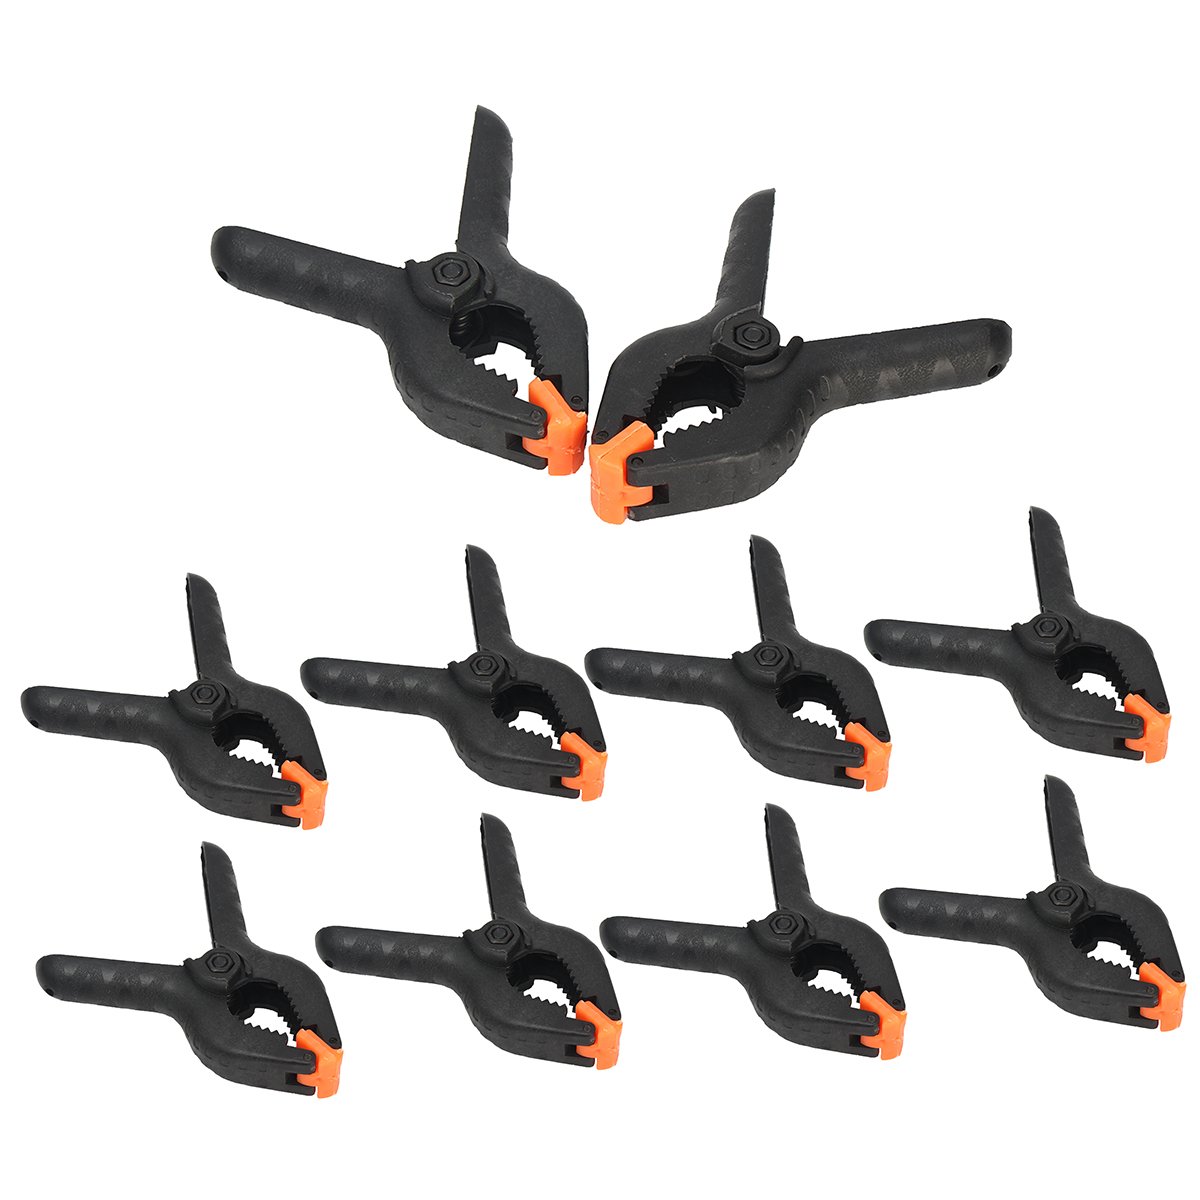 10PCS 4 inch Spring Clamps DIY Tools Plastic Nylon For Woodworking Hobbies 1